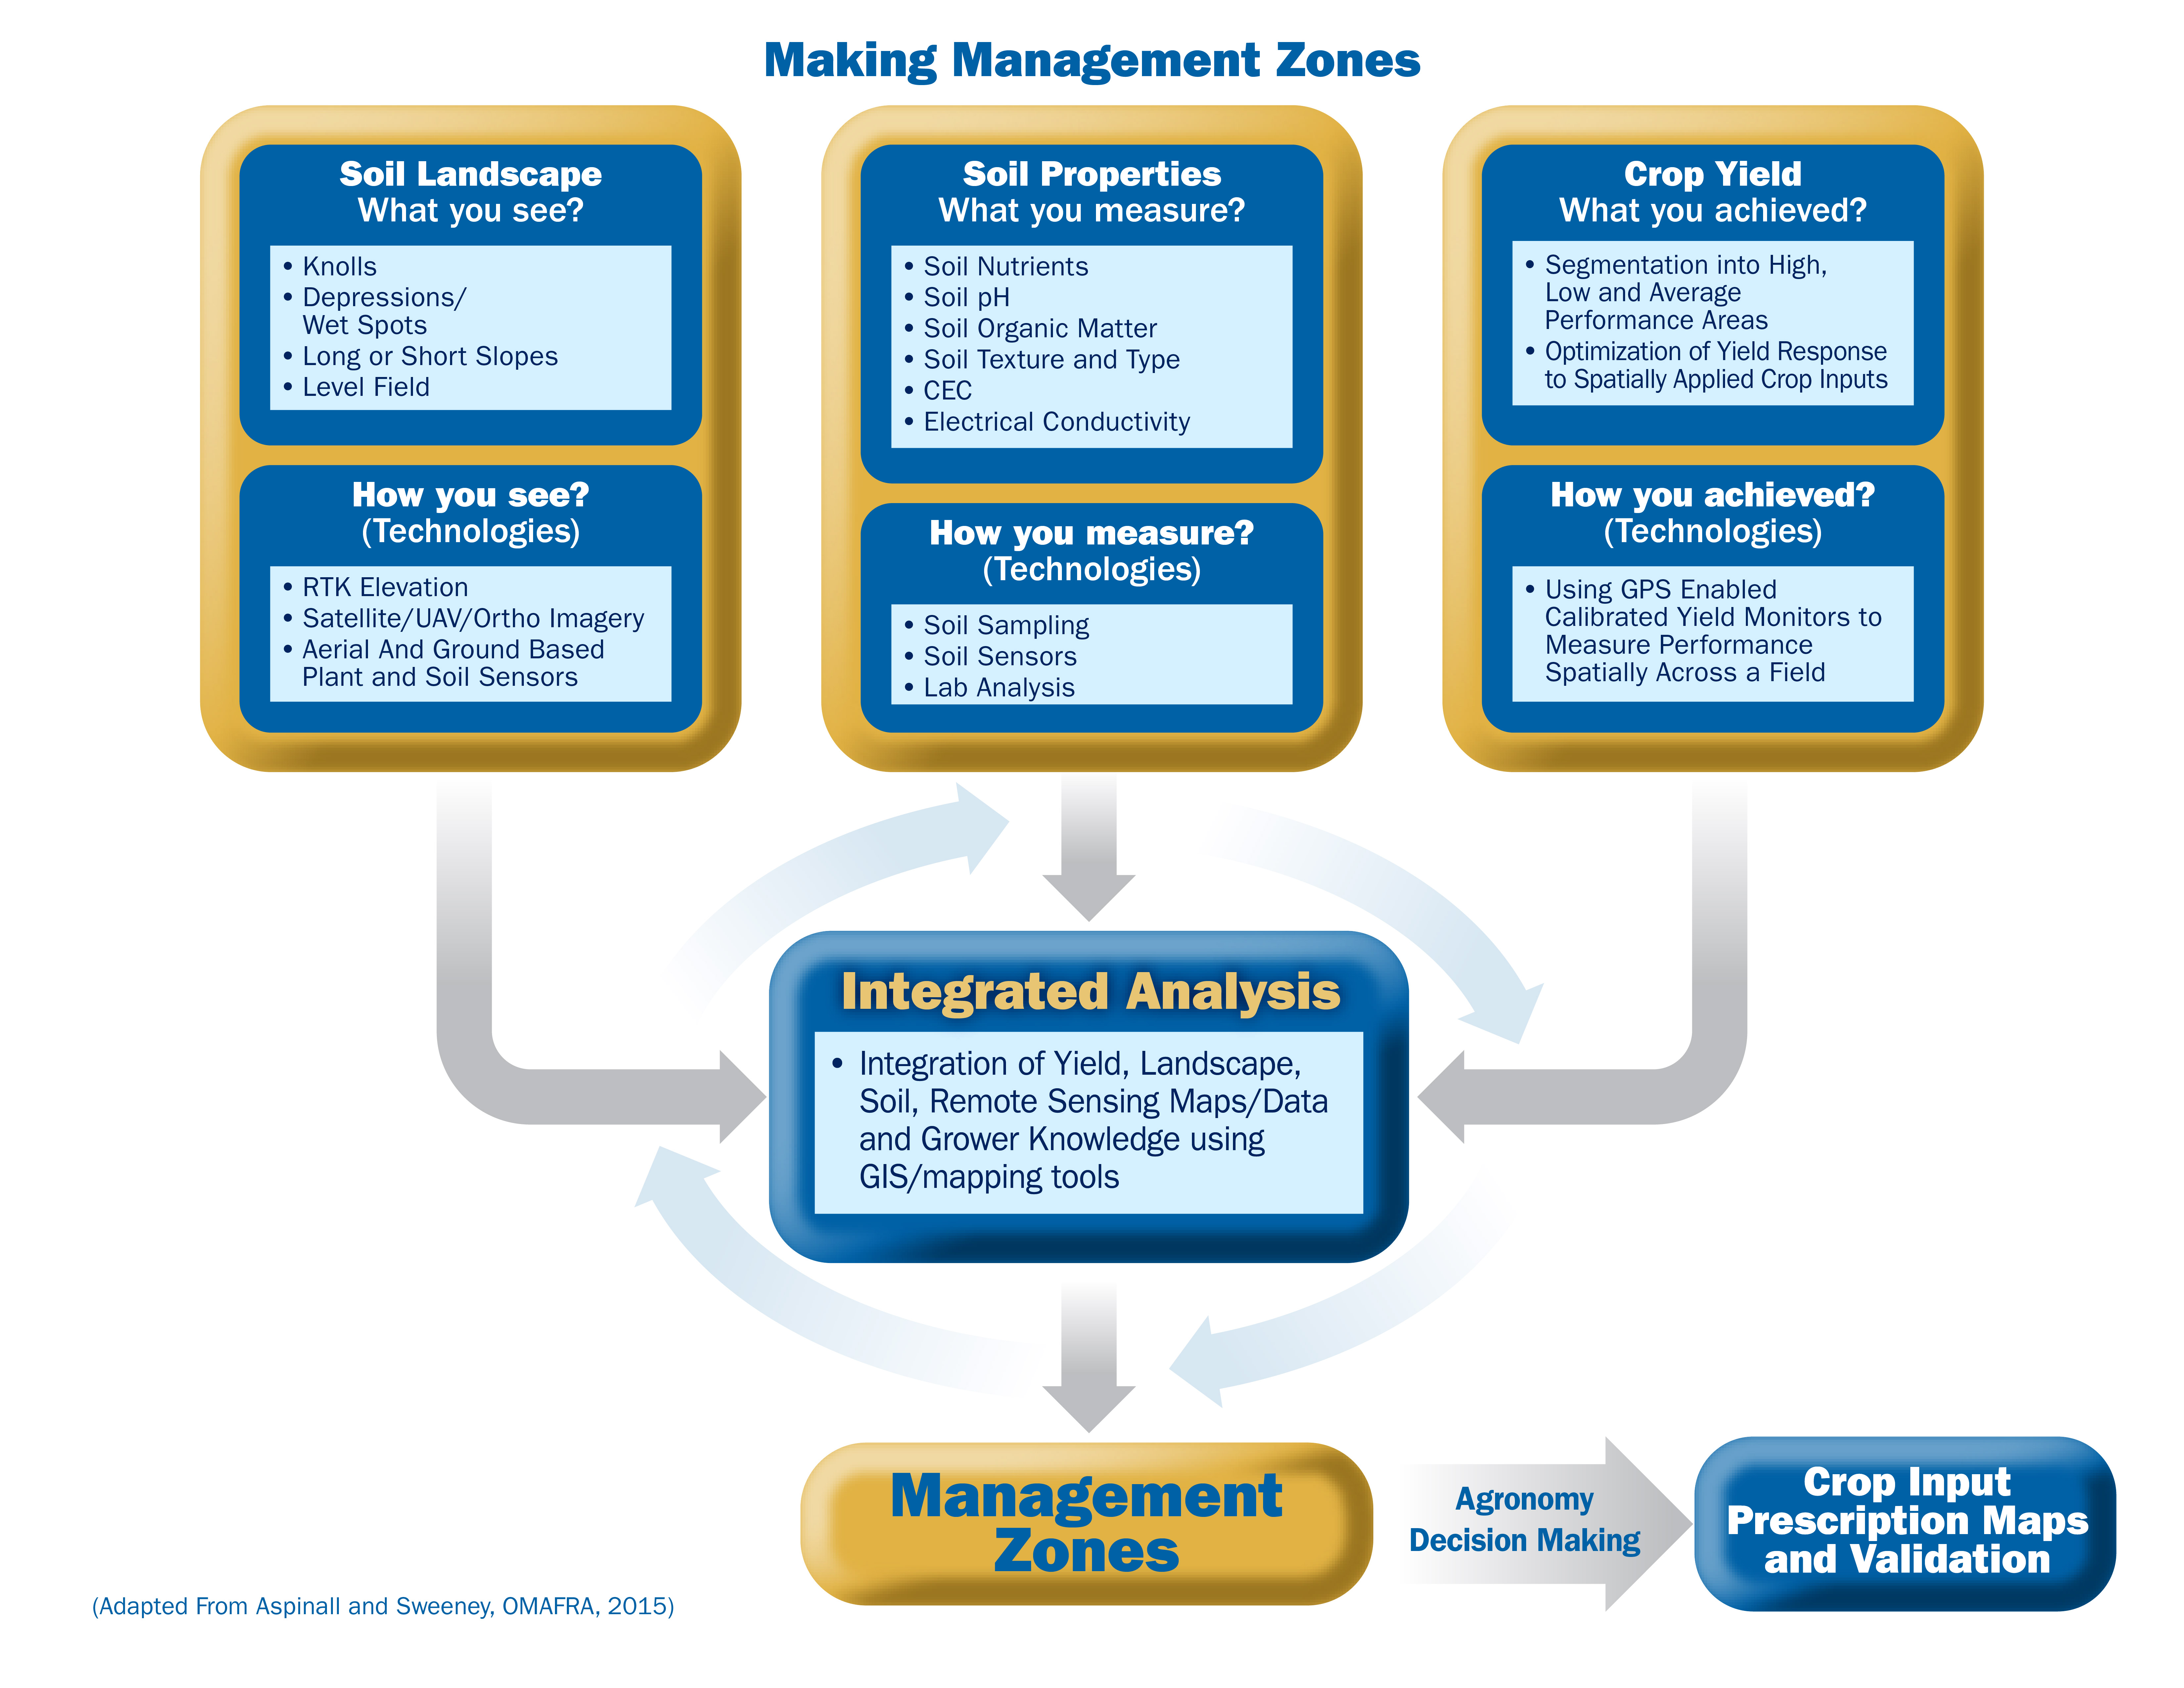 Representation of a management zone development process (adapted from Aspinall and Sweeney, OMAFRA, 2014). 